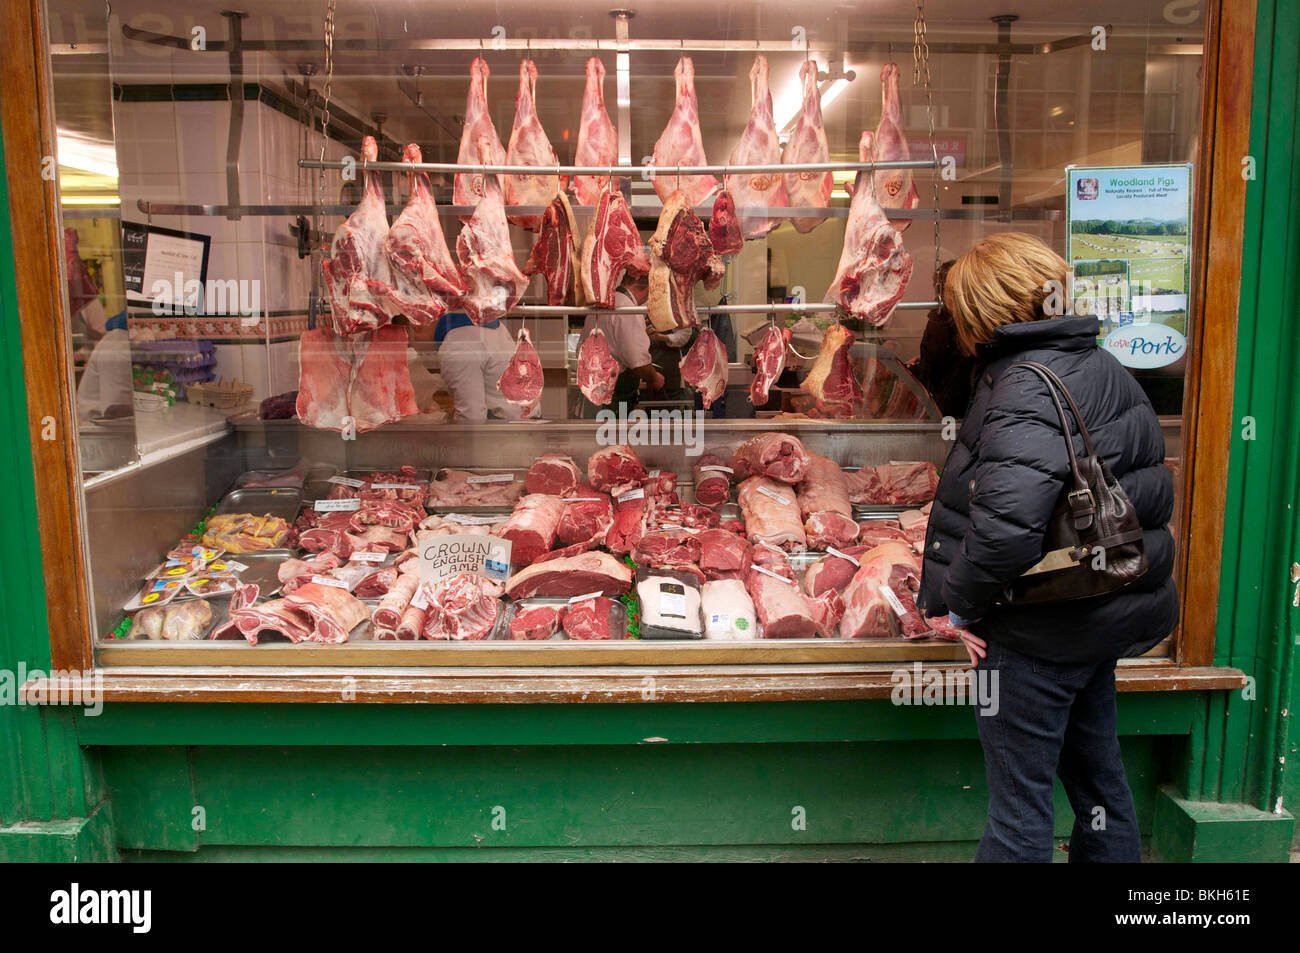 meat-hangs-on-display-in-a-traditional-butchers-shop-window-with-a-bkh61e.jpg